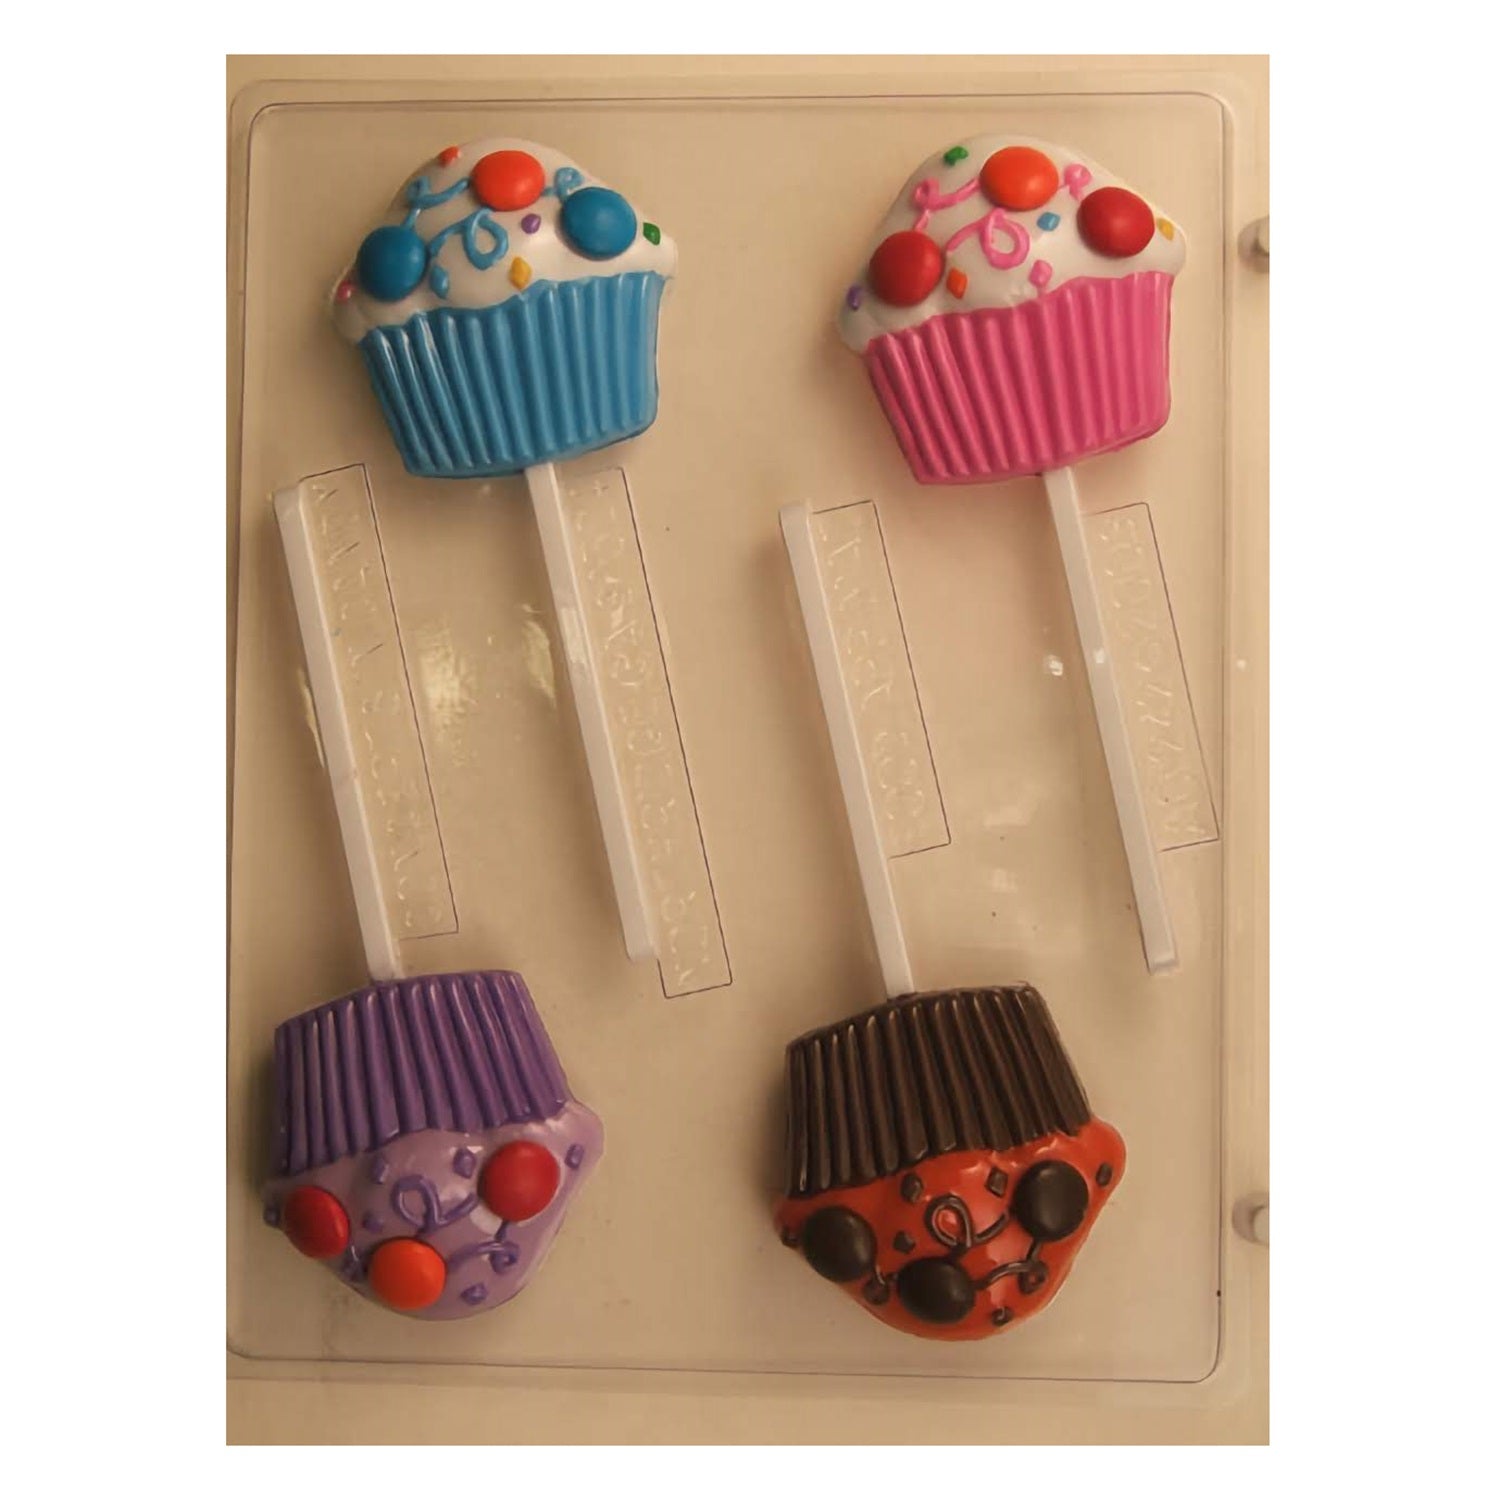 This chocolate mold has four cavities shaped like decorative cupcakes topped with swirls and confetti details, each with a stick insert to create festive lollipop treats.